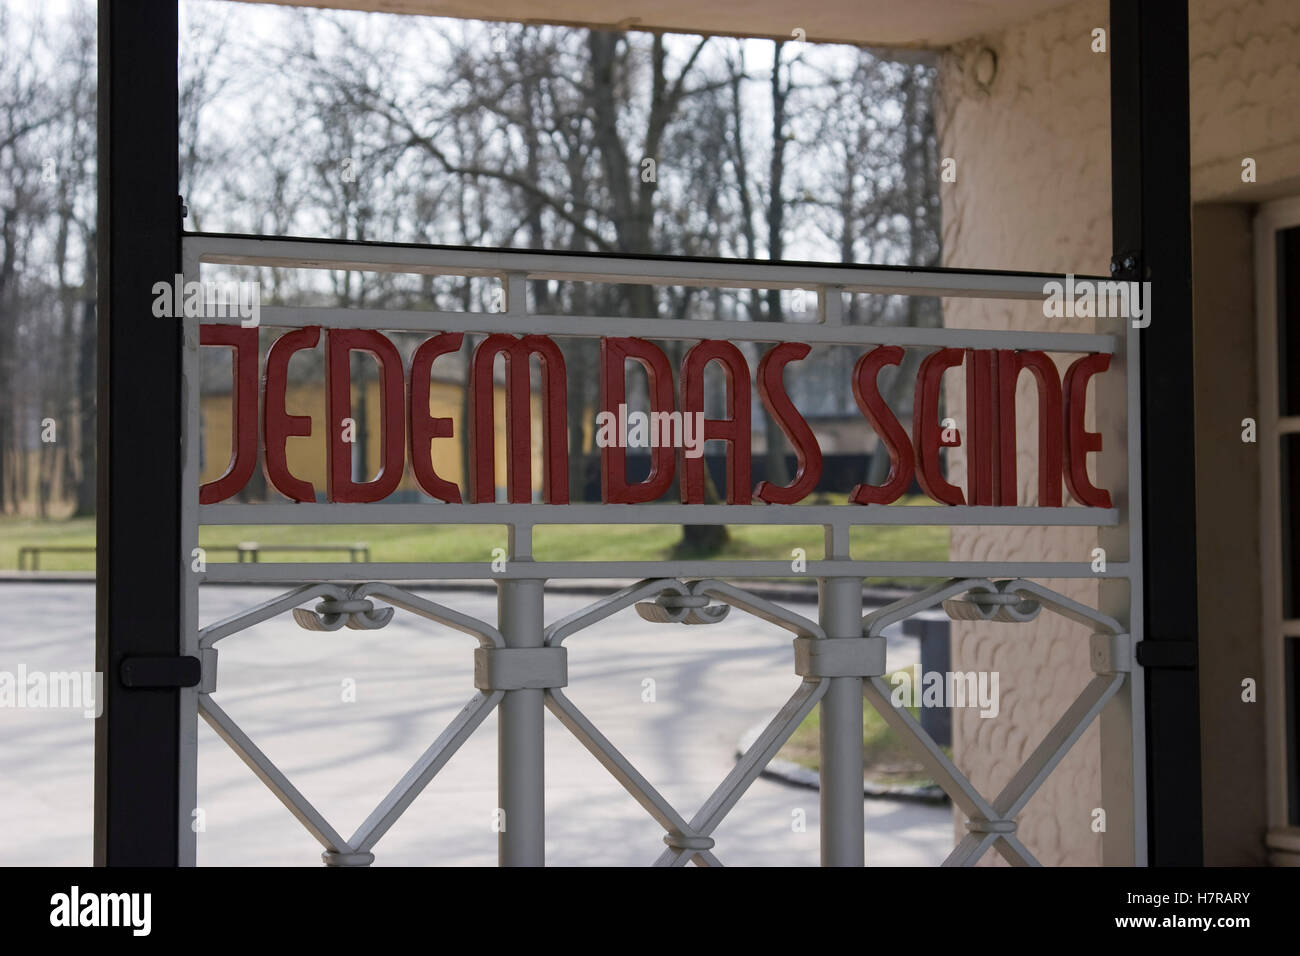 Jedem das seine - words on the entrance gate to Buchenwald concentration camp Stock Photo